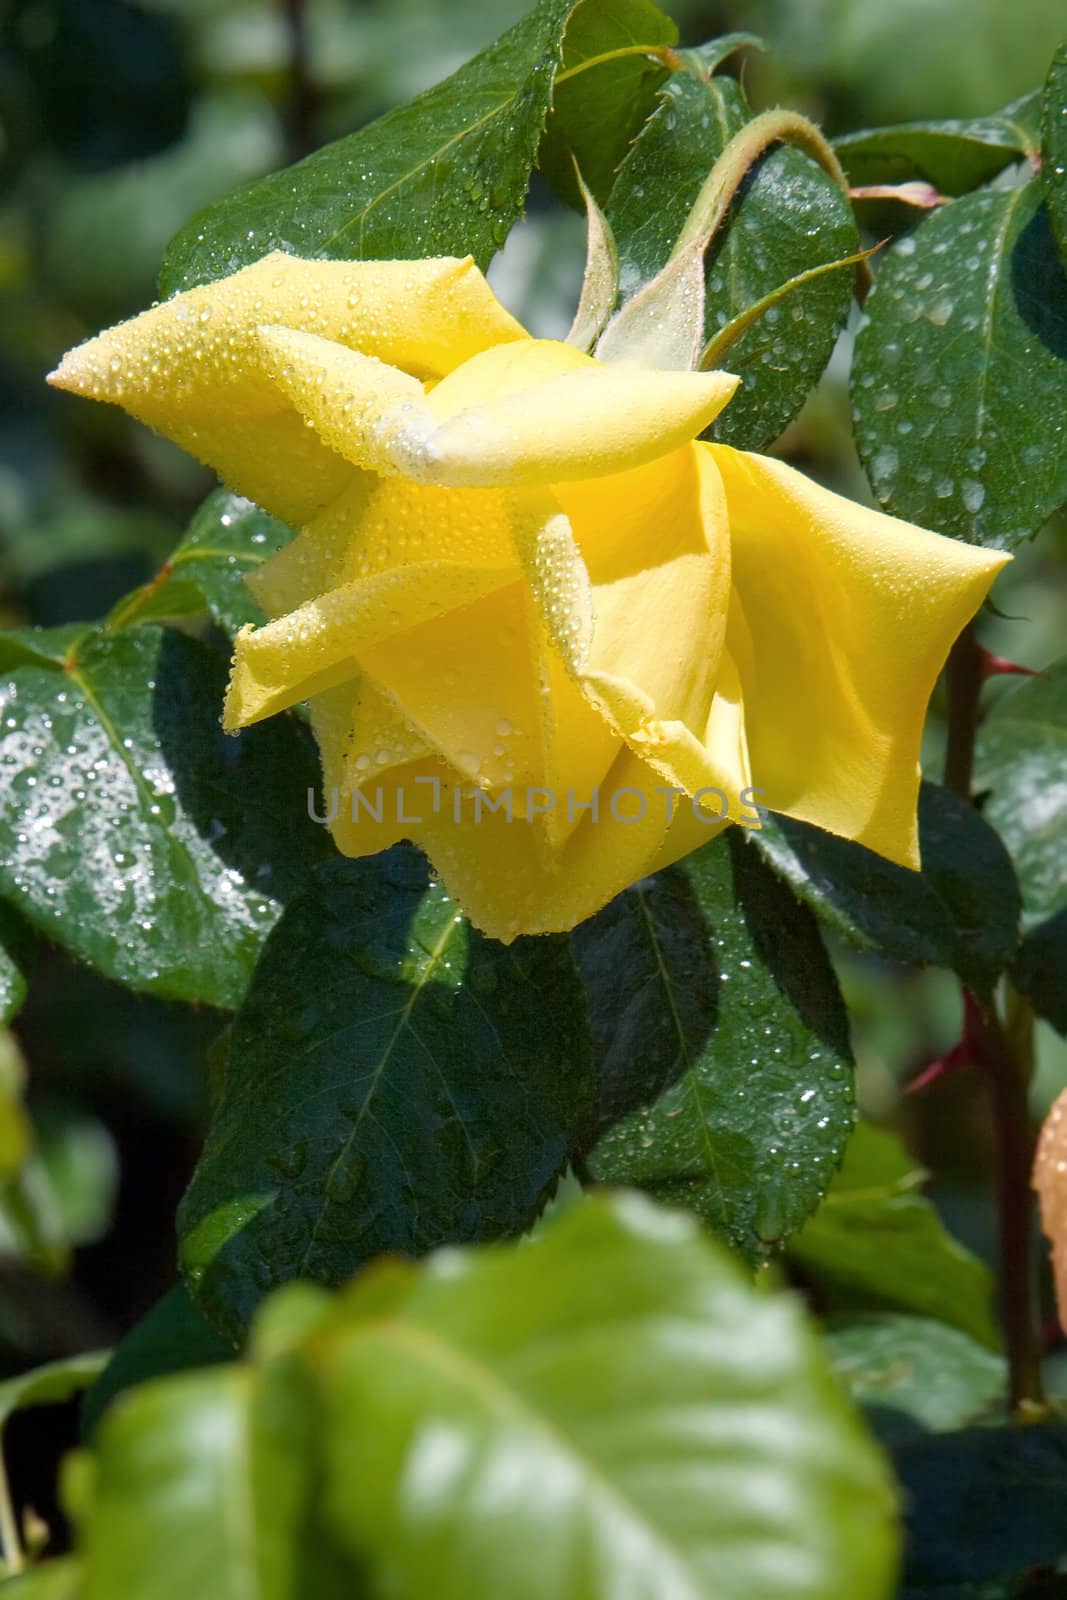 Live yellow rose in dewdrops